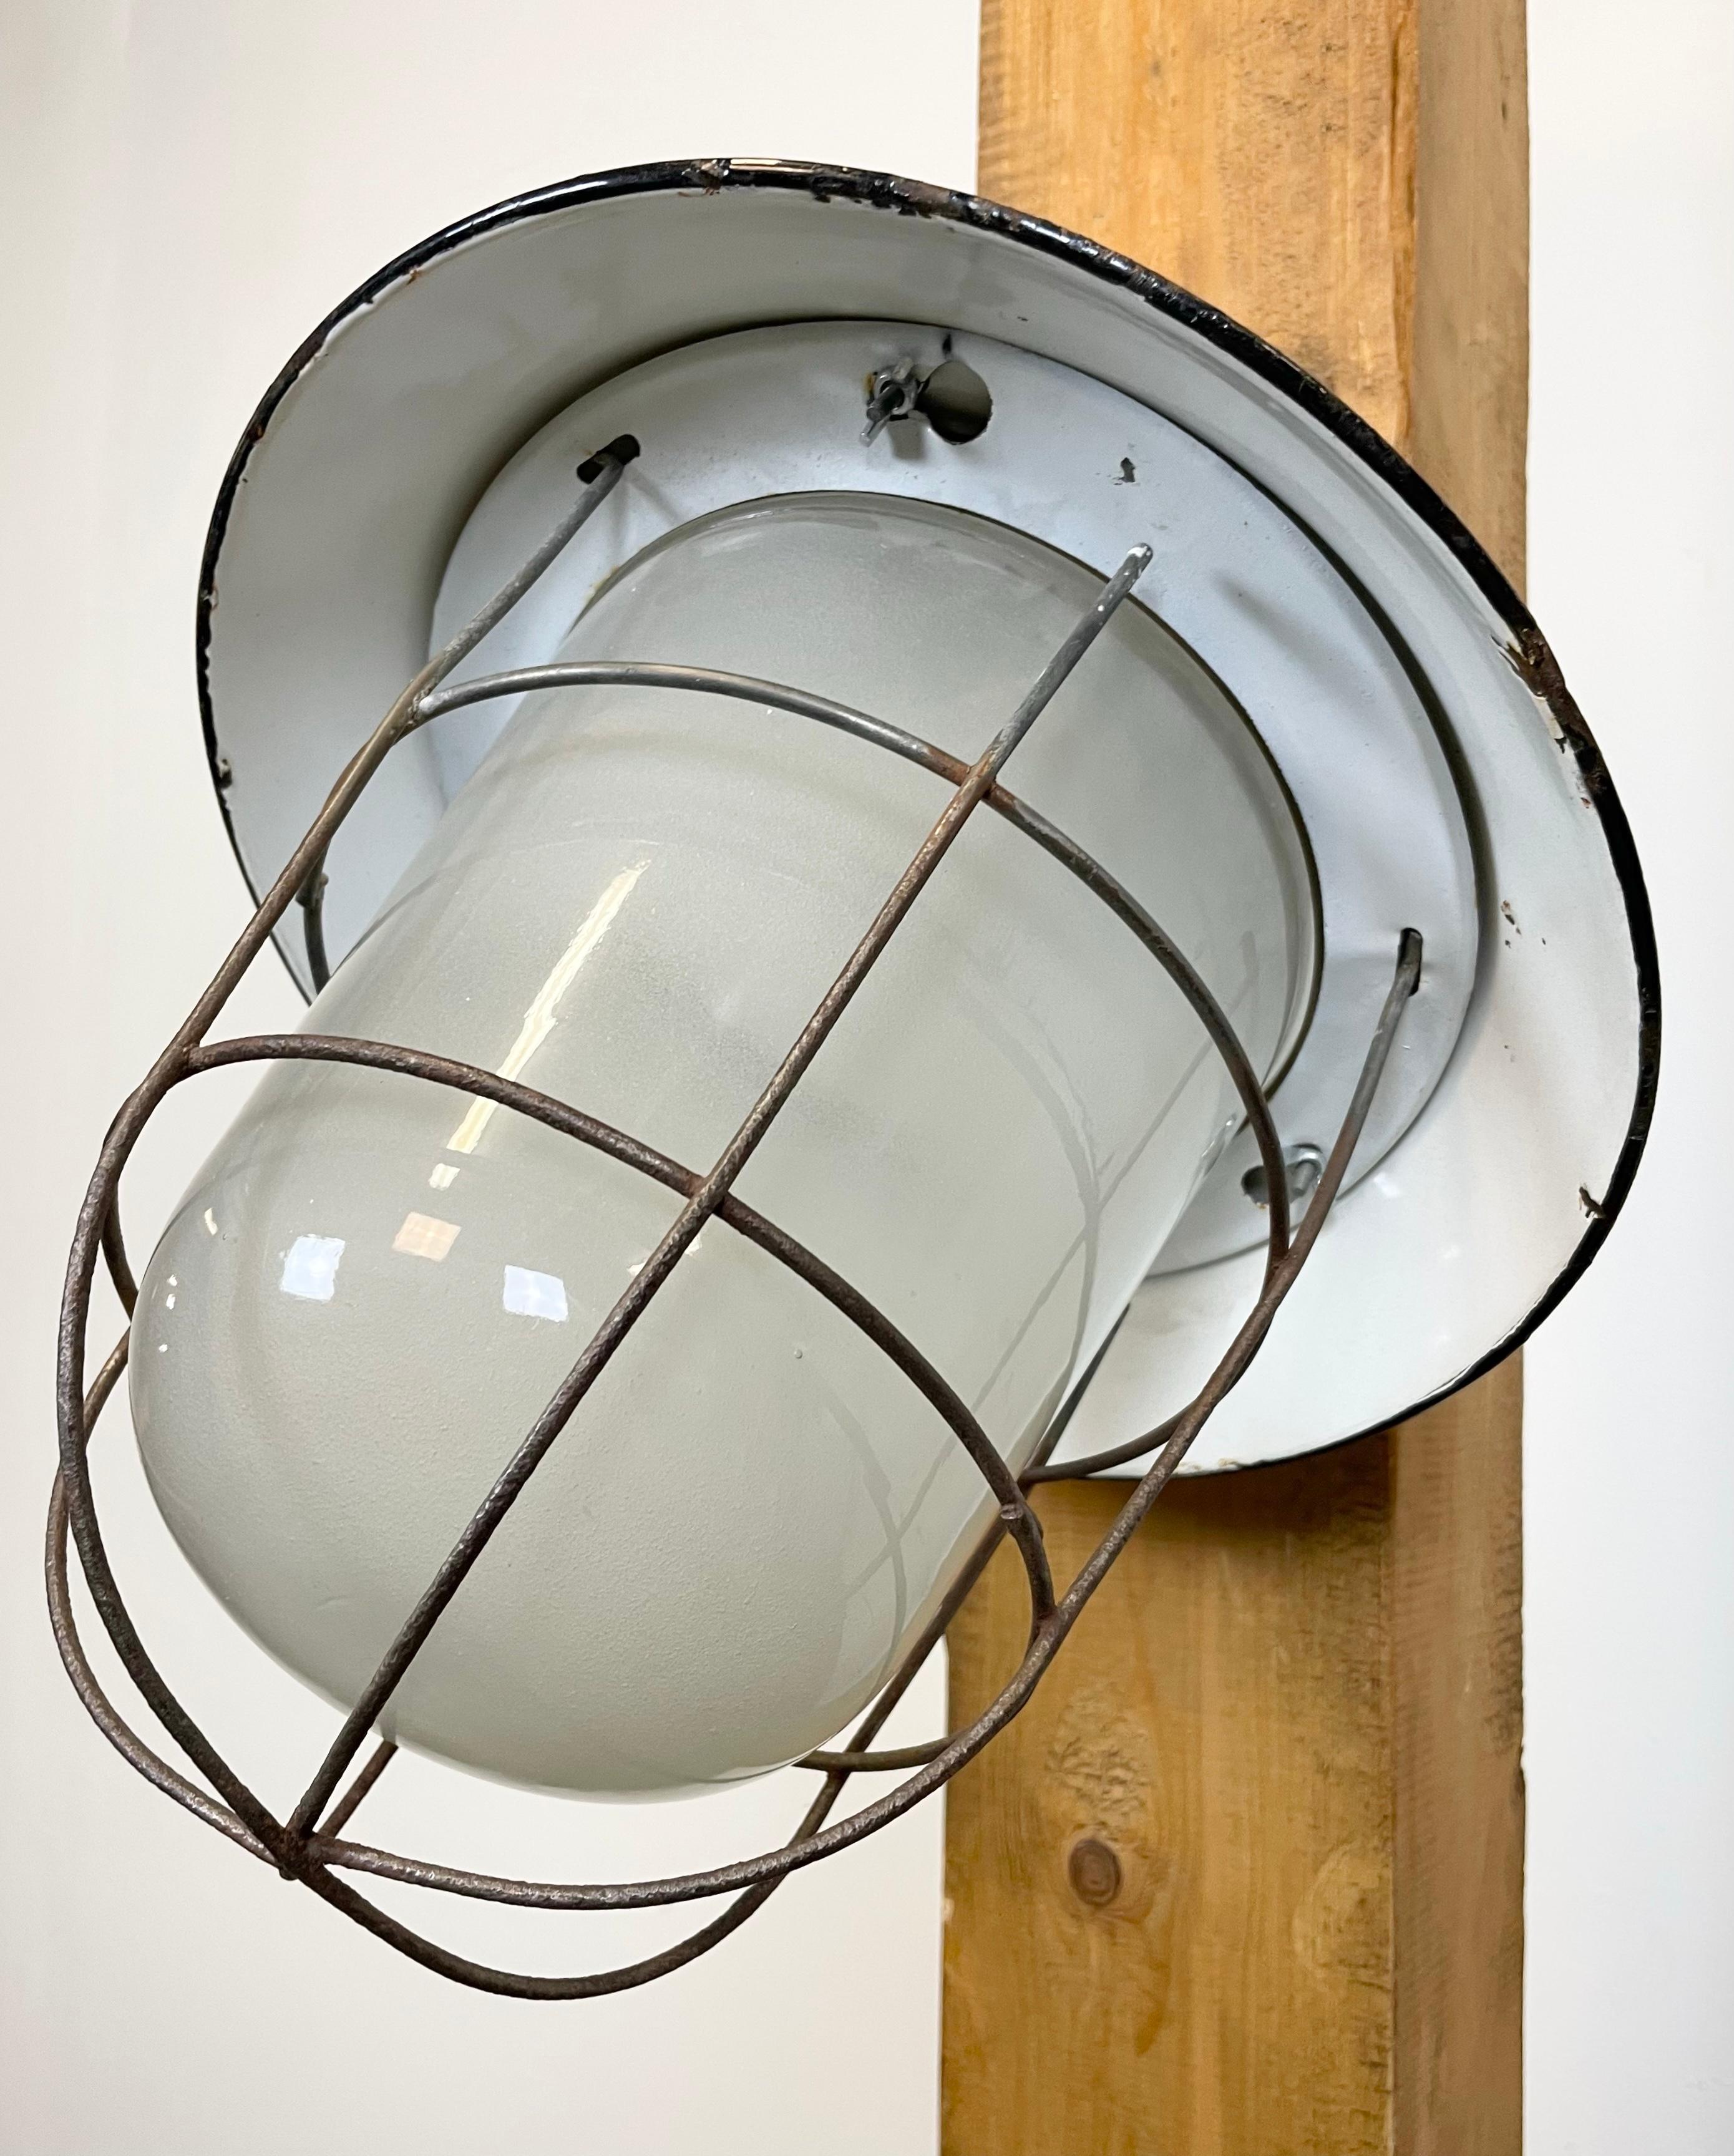 Industrial Black Enamel and Cast Iron Wall Lamp with Iron Grid, 1960s For Sale 6